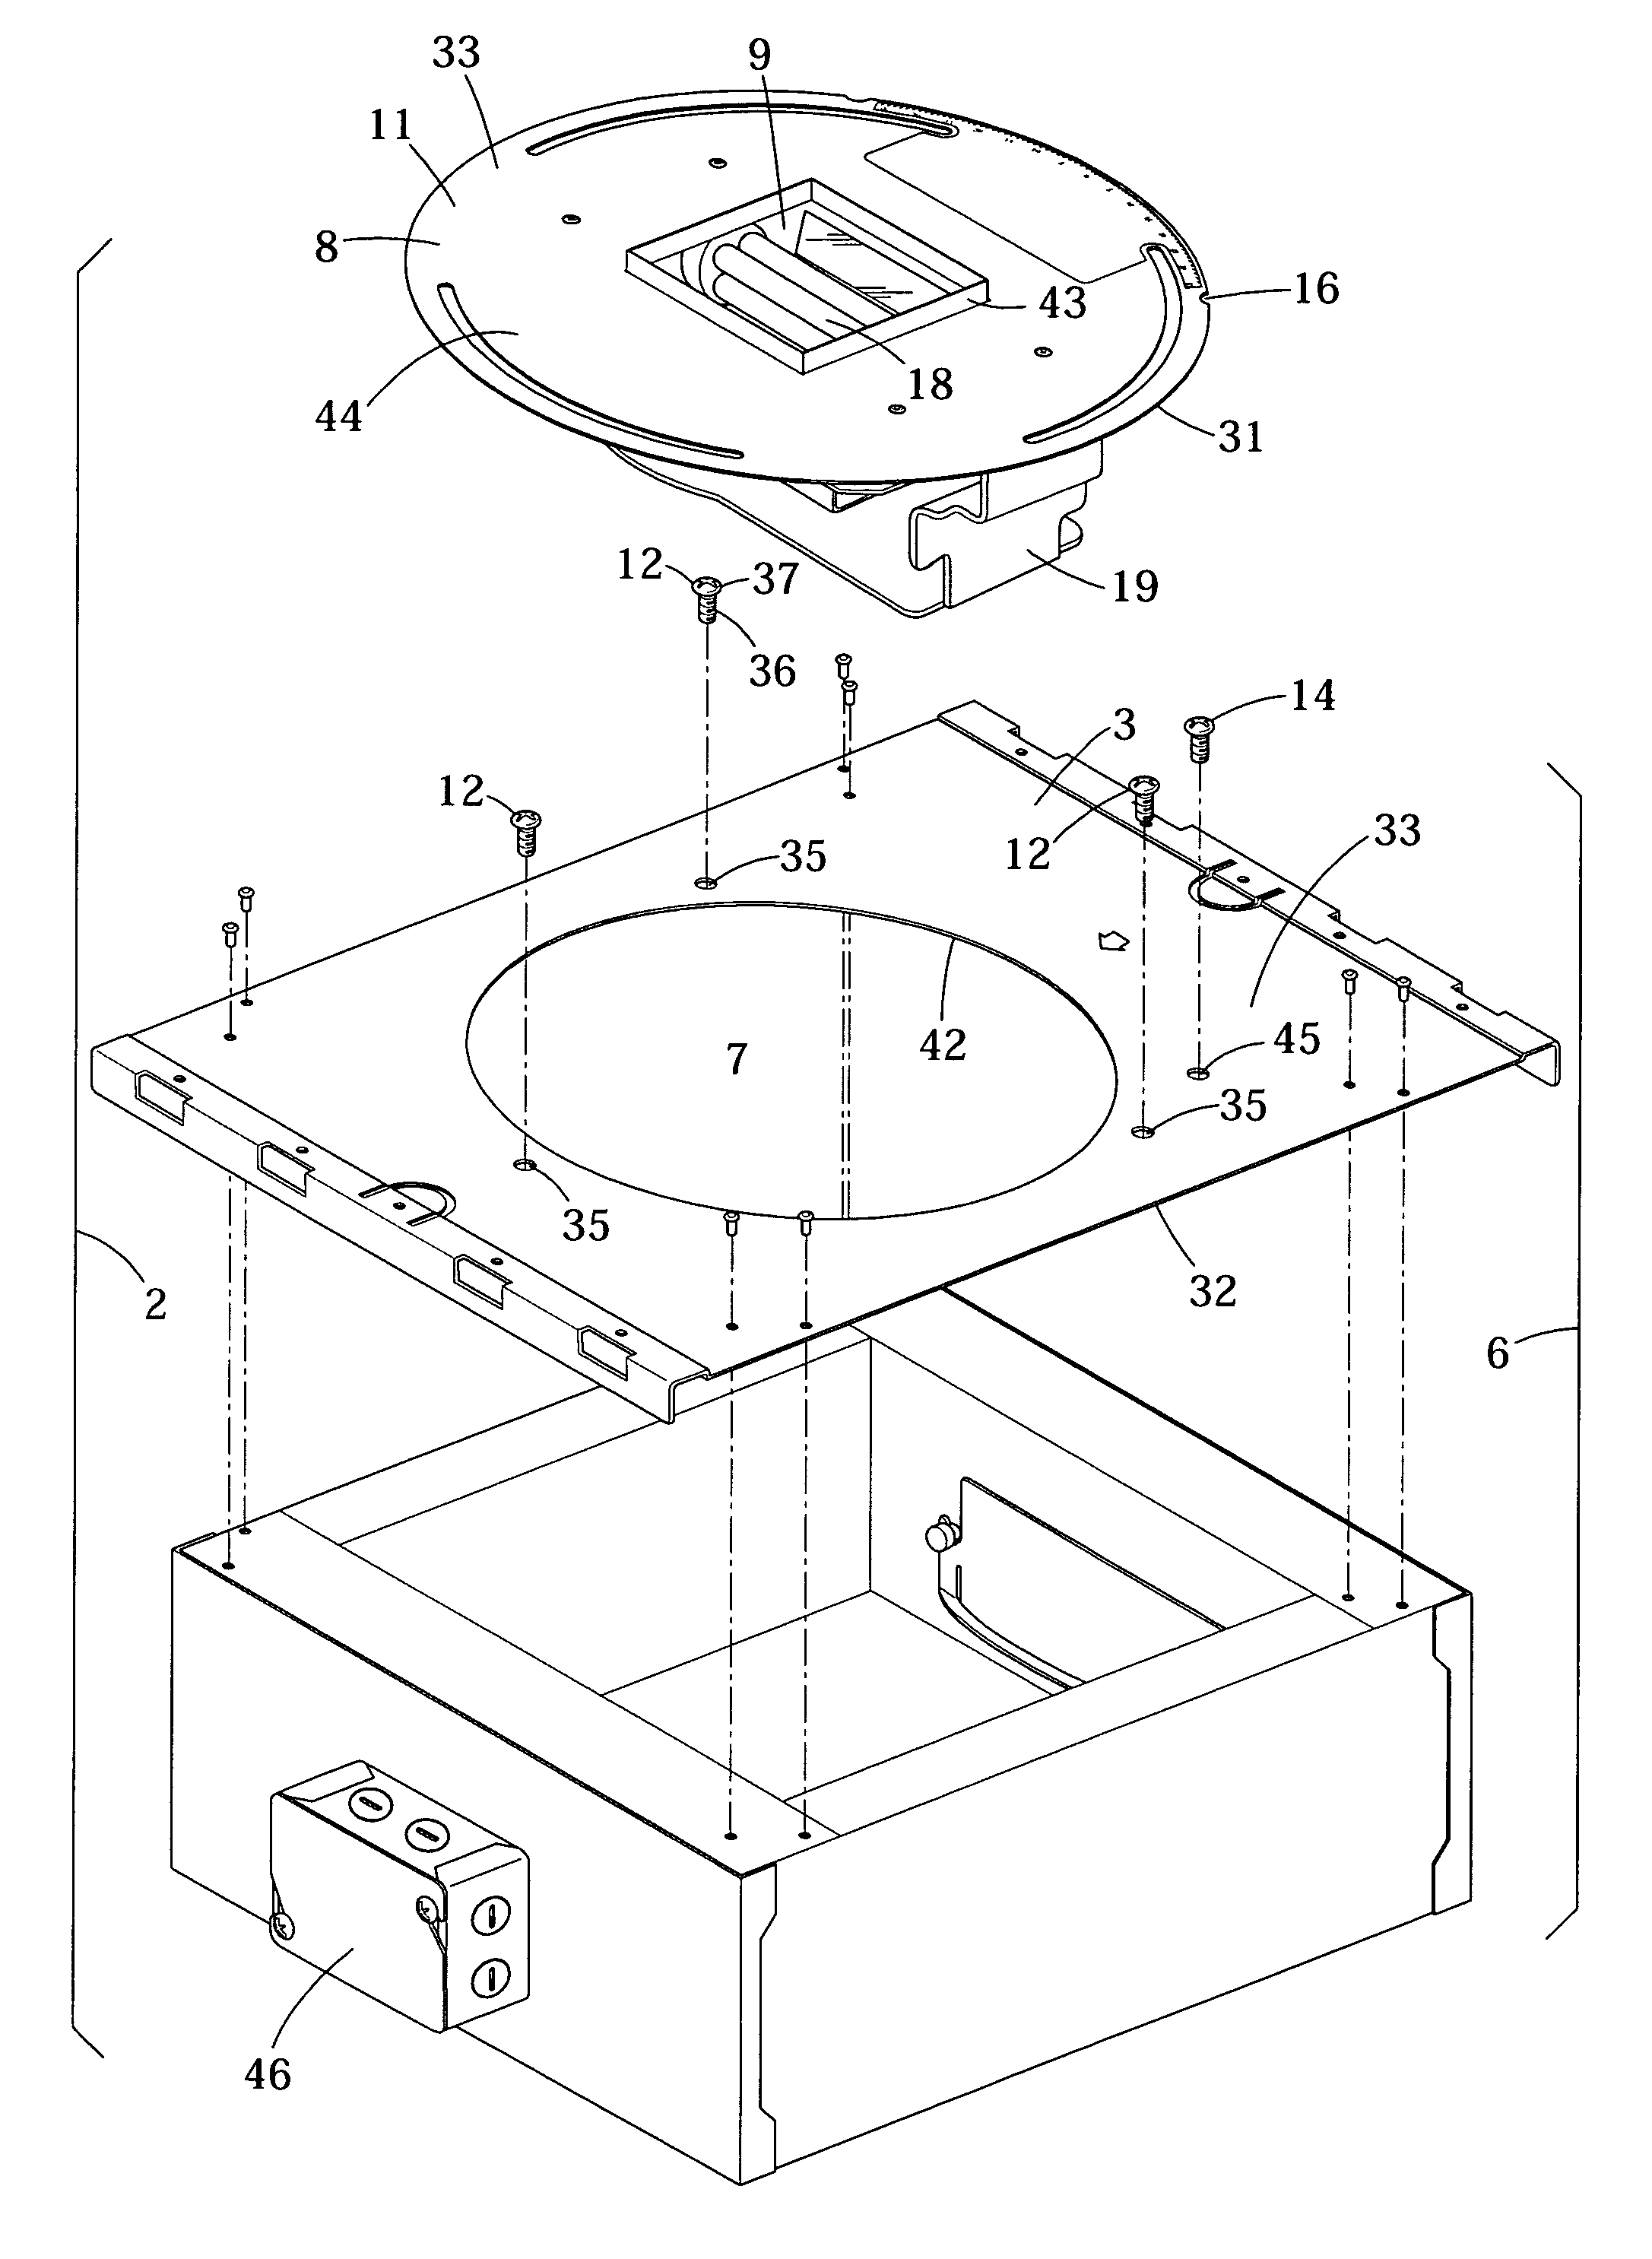 Recessed light housing with a rotatable aperture